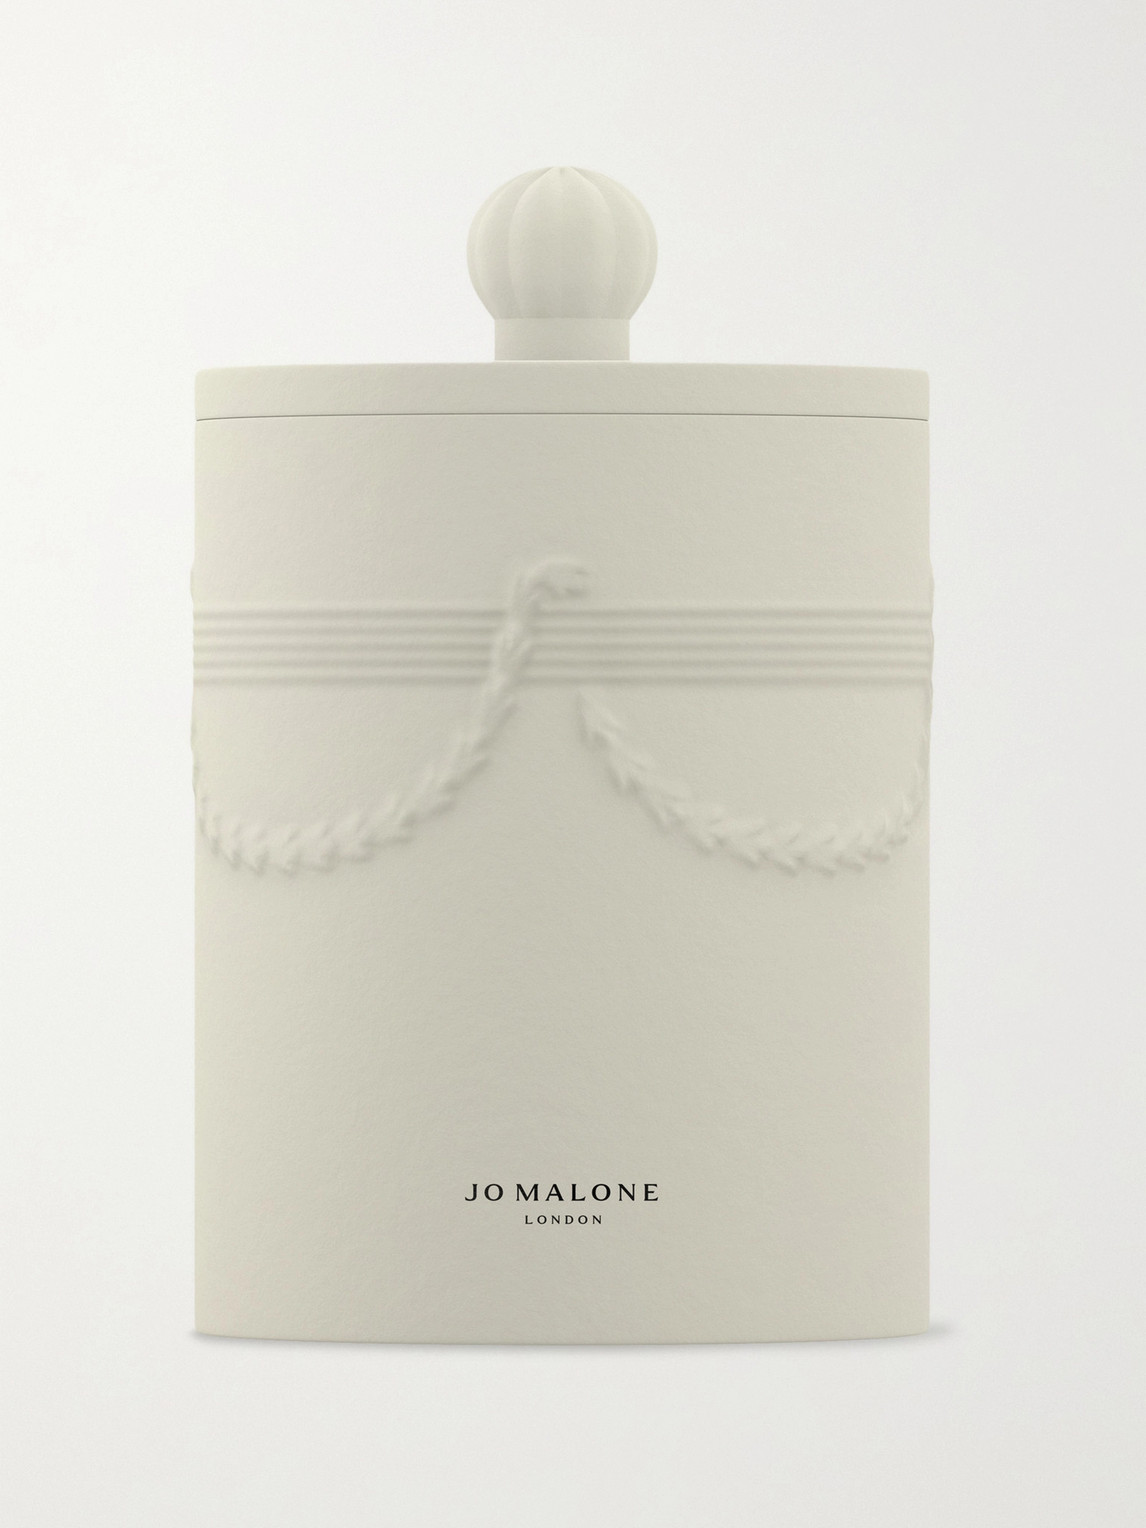 JO MALONE LONDON PASTEL MACAROONS SCENTED CANDLE, 300G